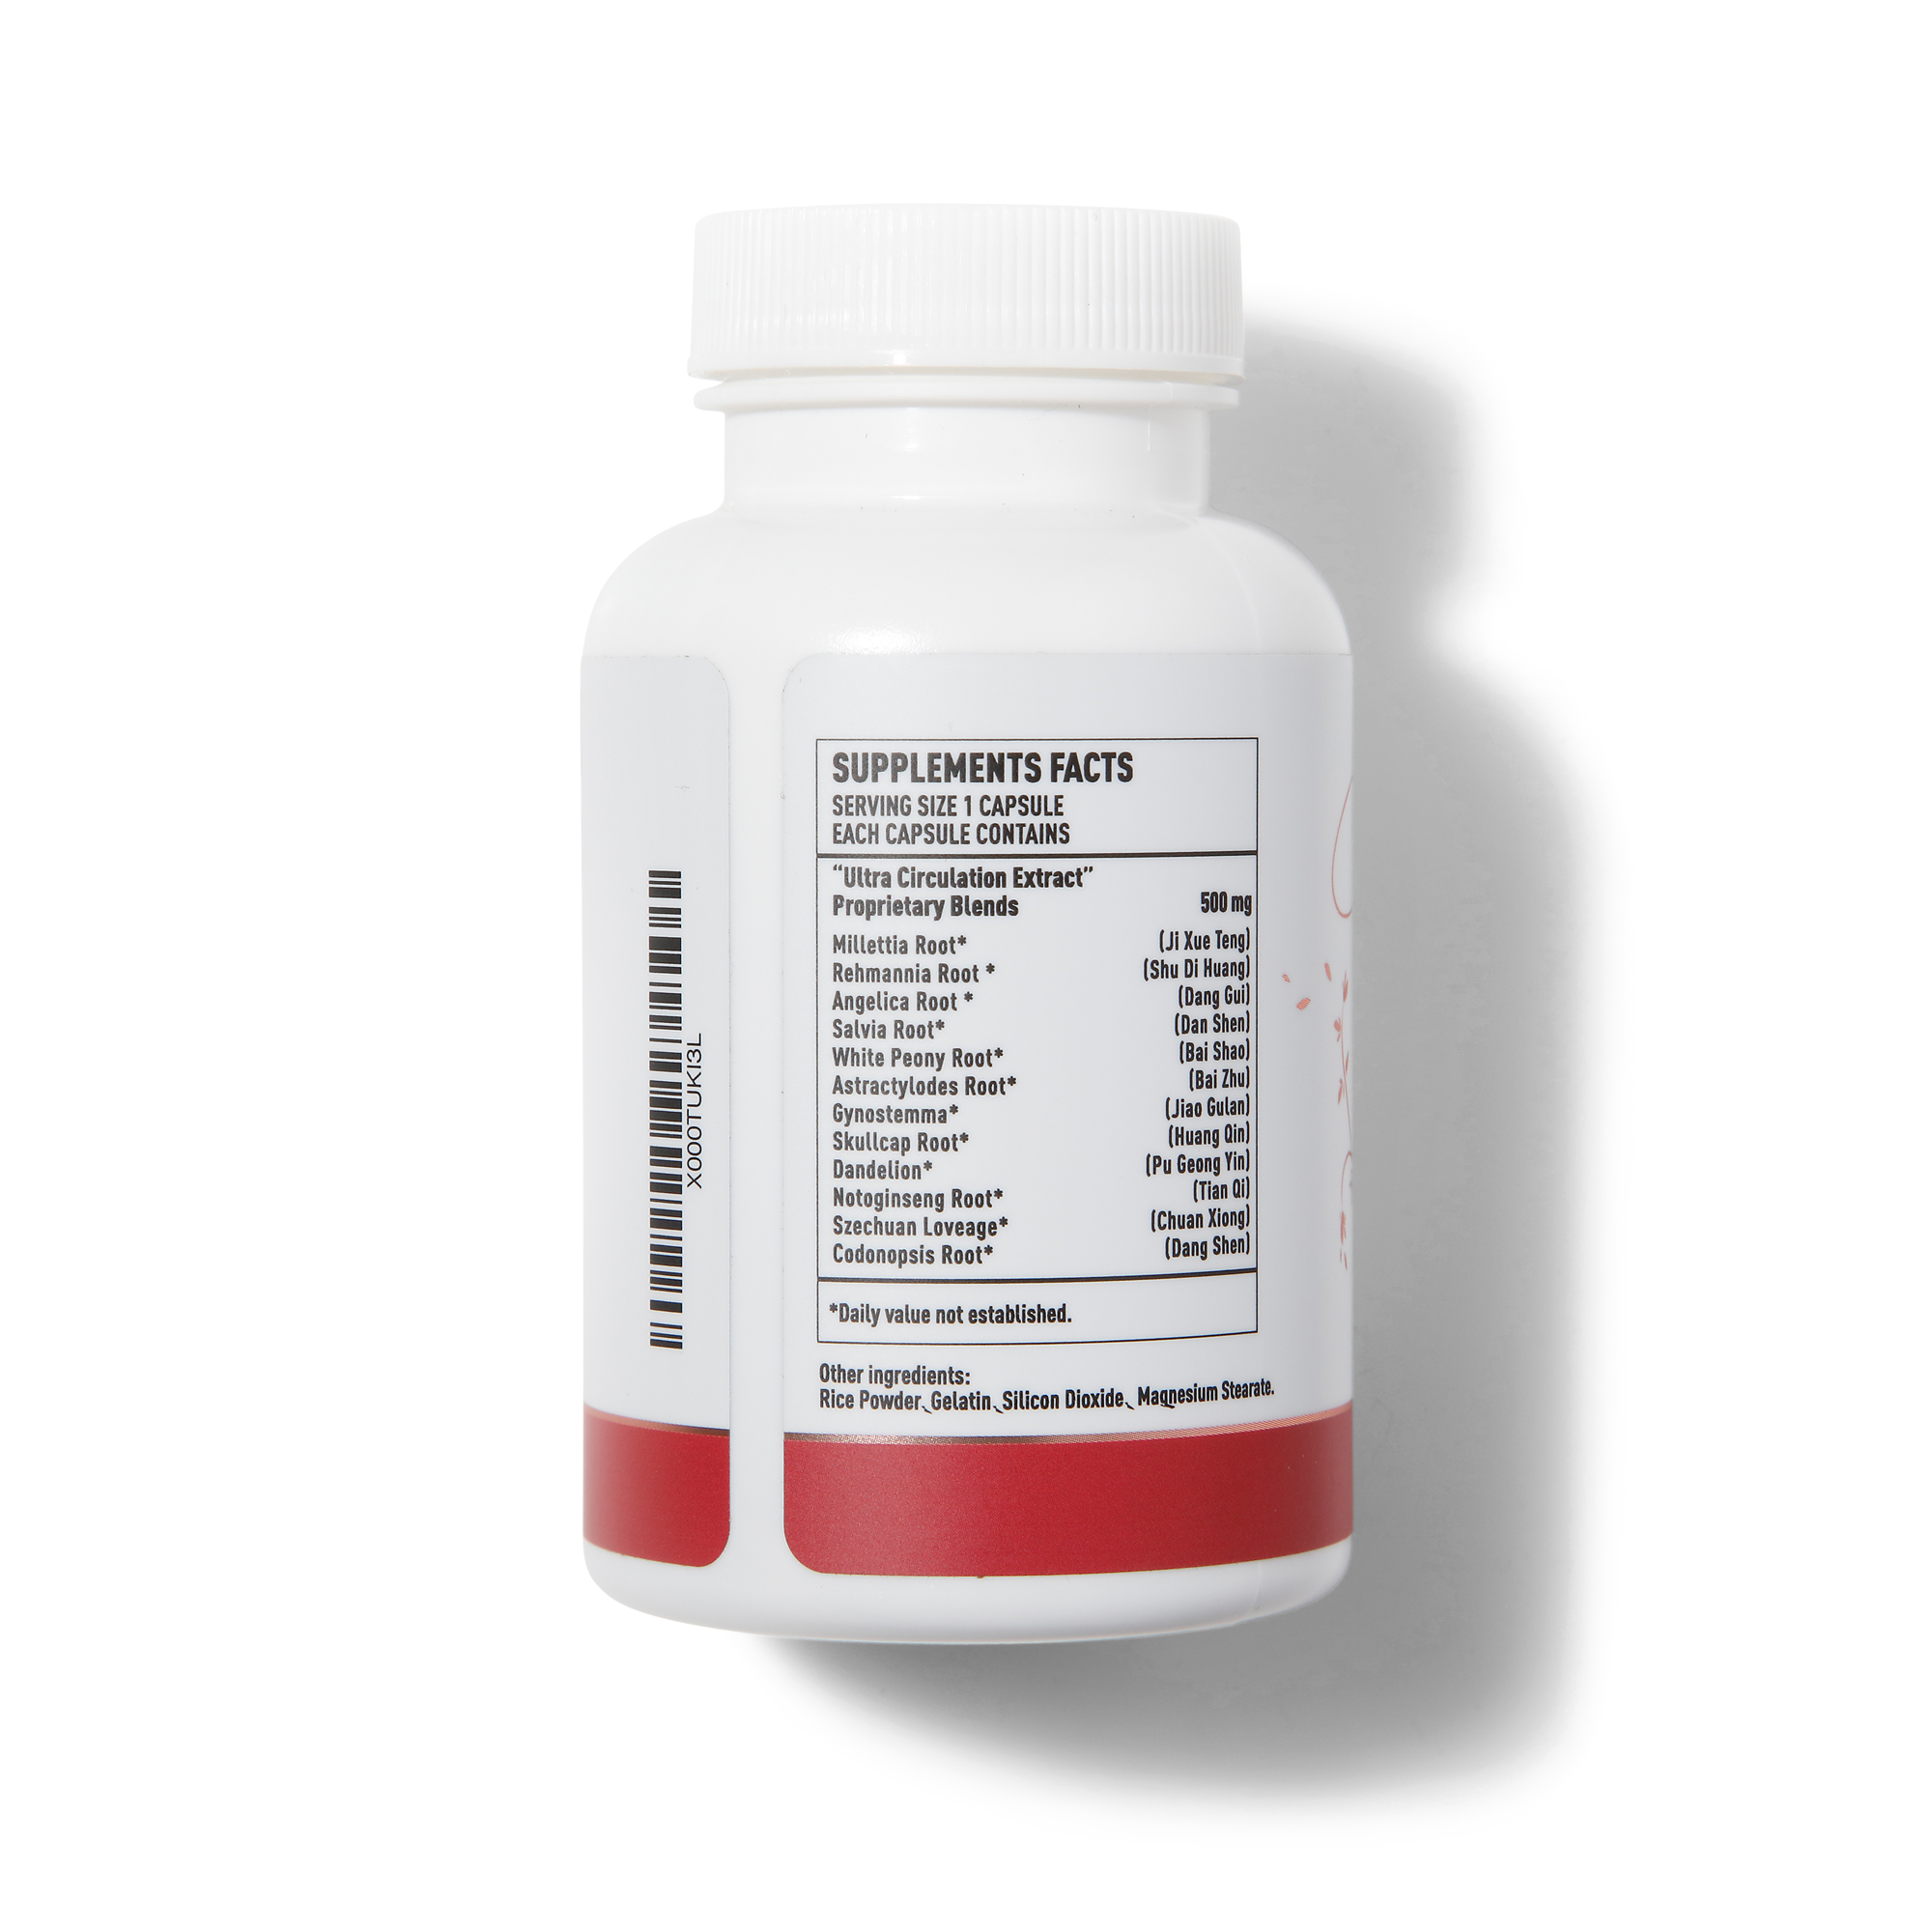 Ultra Circulation Plus® Supplements - Supports Heart, Leg Vein, Vessels and Cardiovascular Health